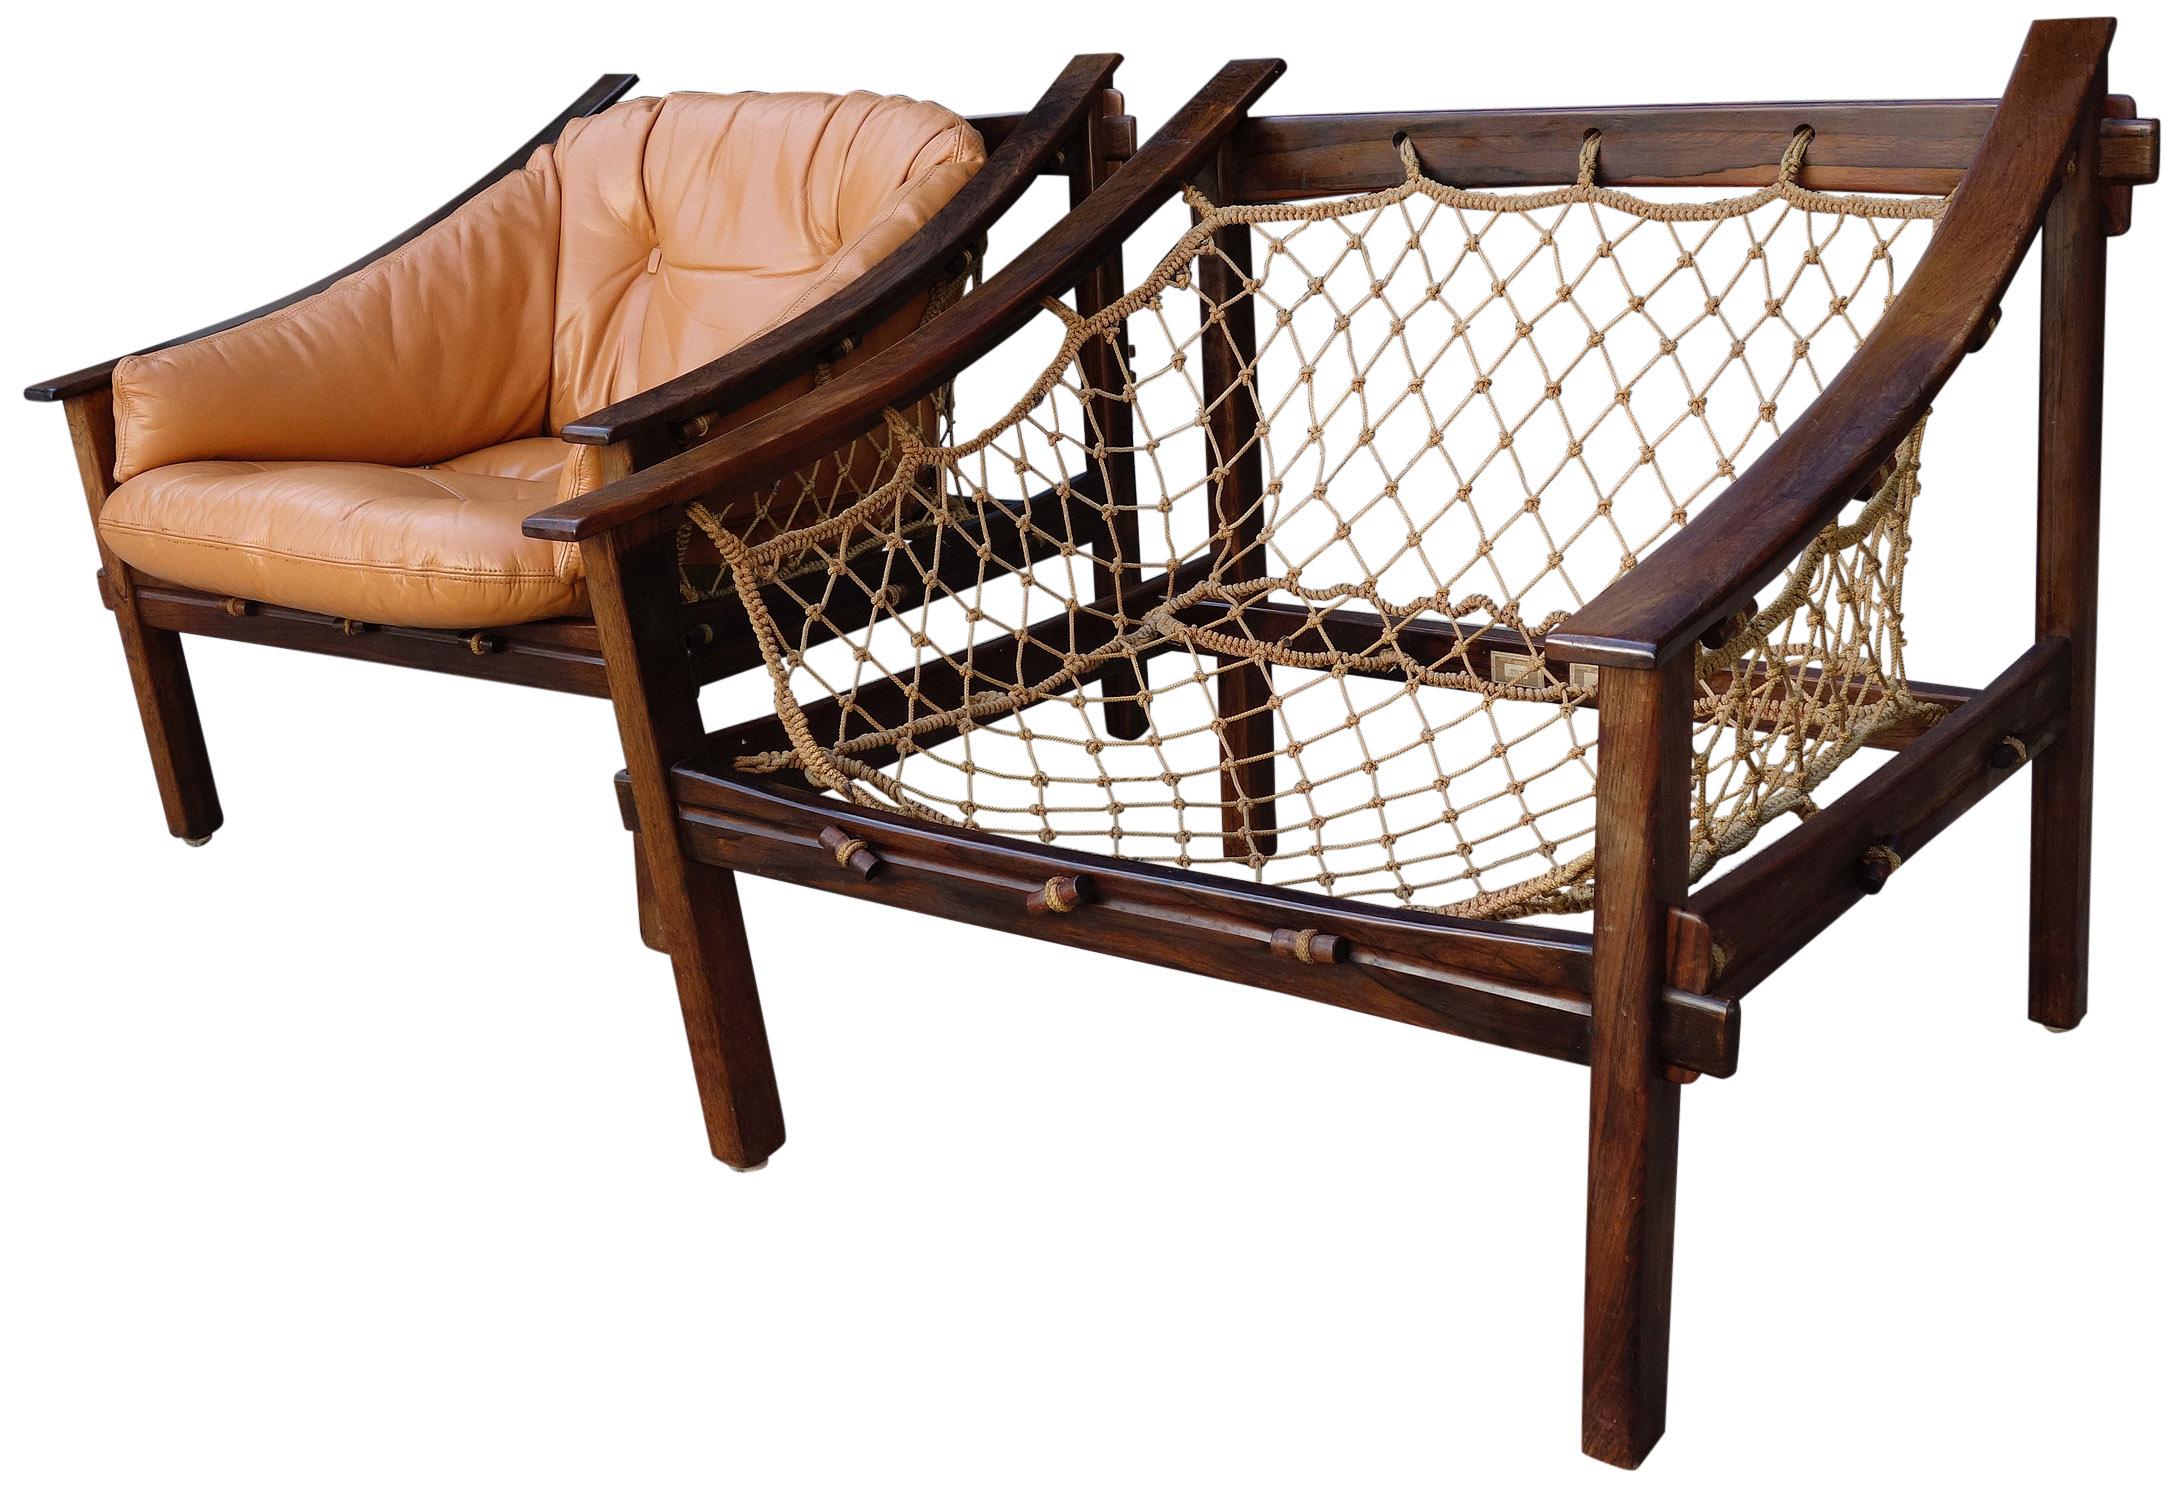 Pure Brazilian midcentury design. Featuring a solid Brazilian rosewood frame and netted rope inspired by local fisherman. These lounge chairs have a sleek design that look spectacular from any angle. This rare set is in original condition with the